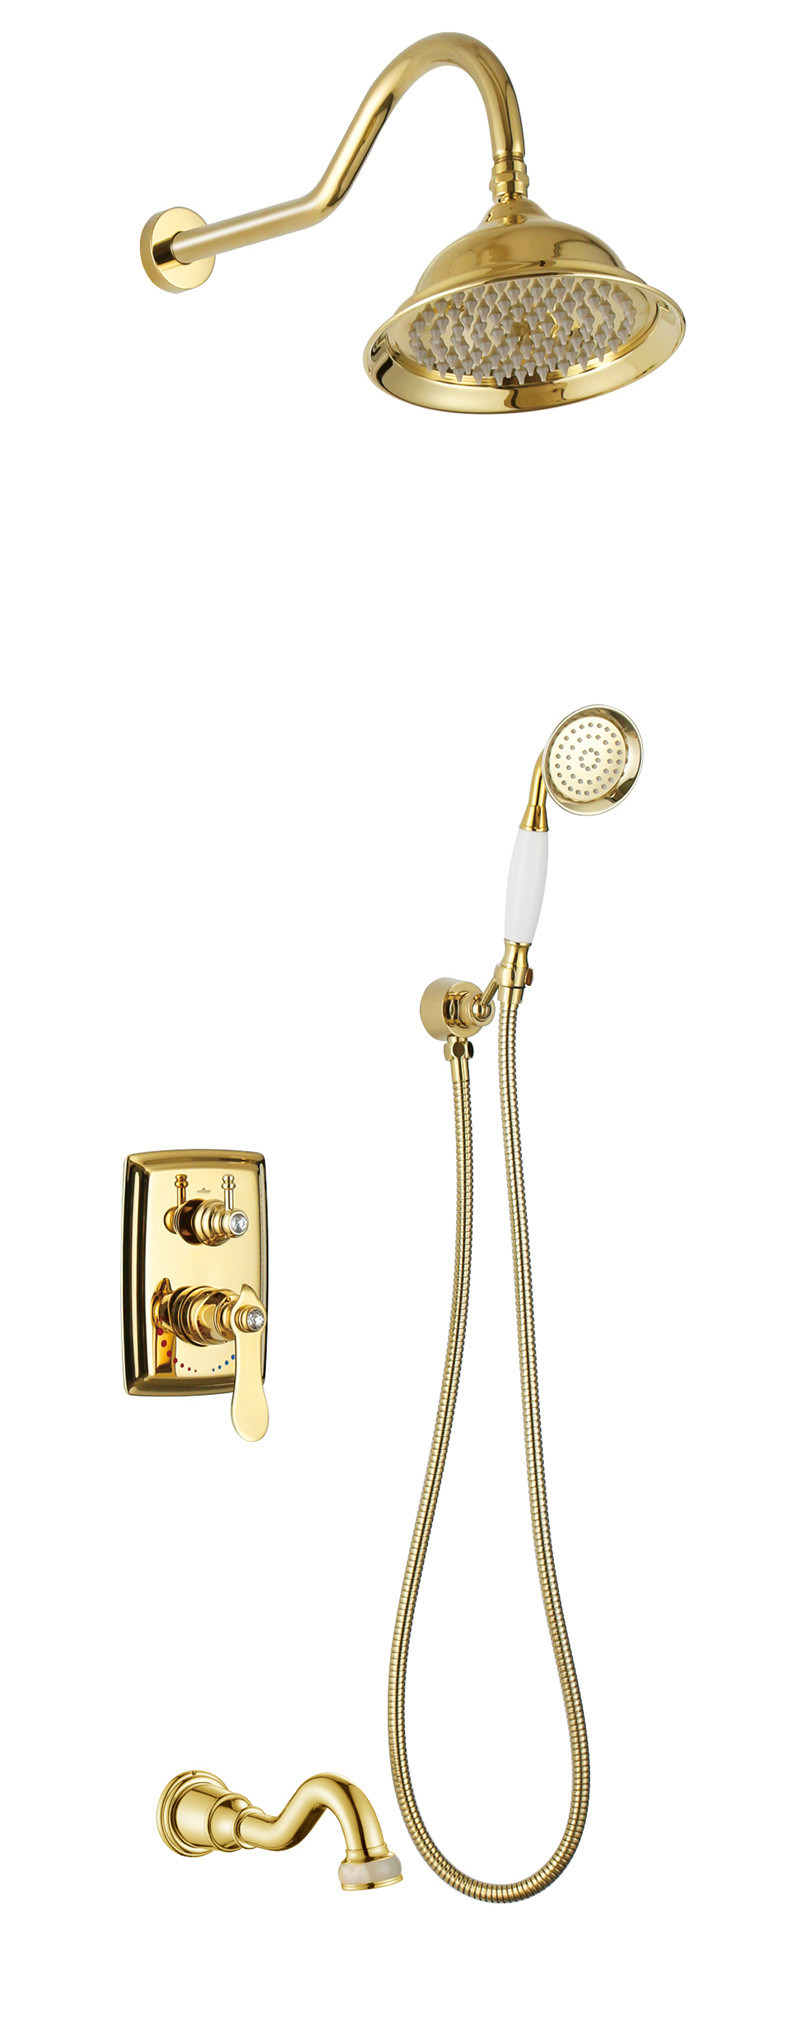 Wall Mounted Antique Brass Concealed Shower Set (zf-W45)